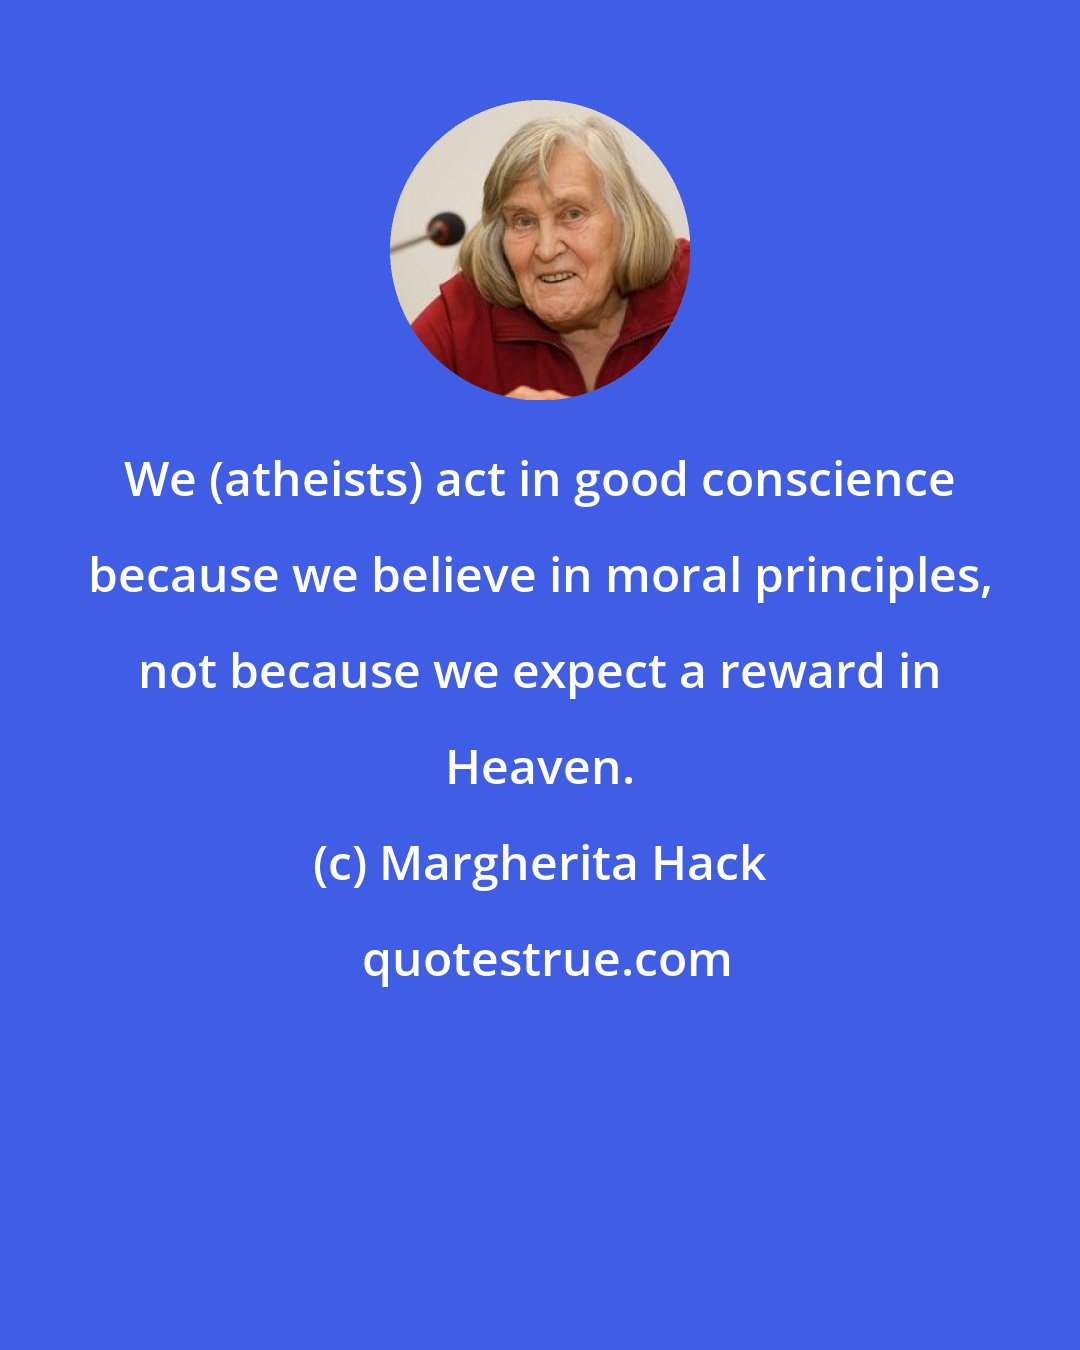 Margherita Hack: We (atheists) act in good conscience because we believe in moral principles, not because we expect a reward in Heaven.